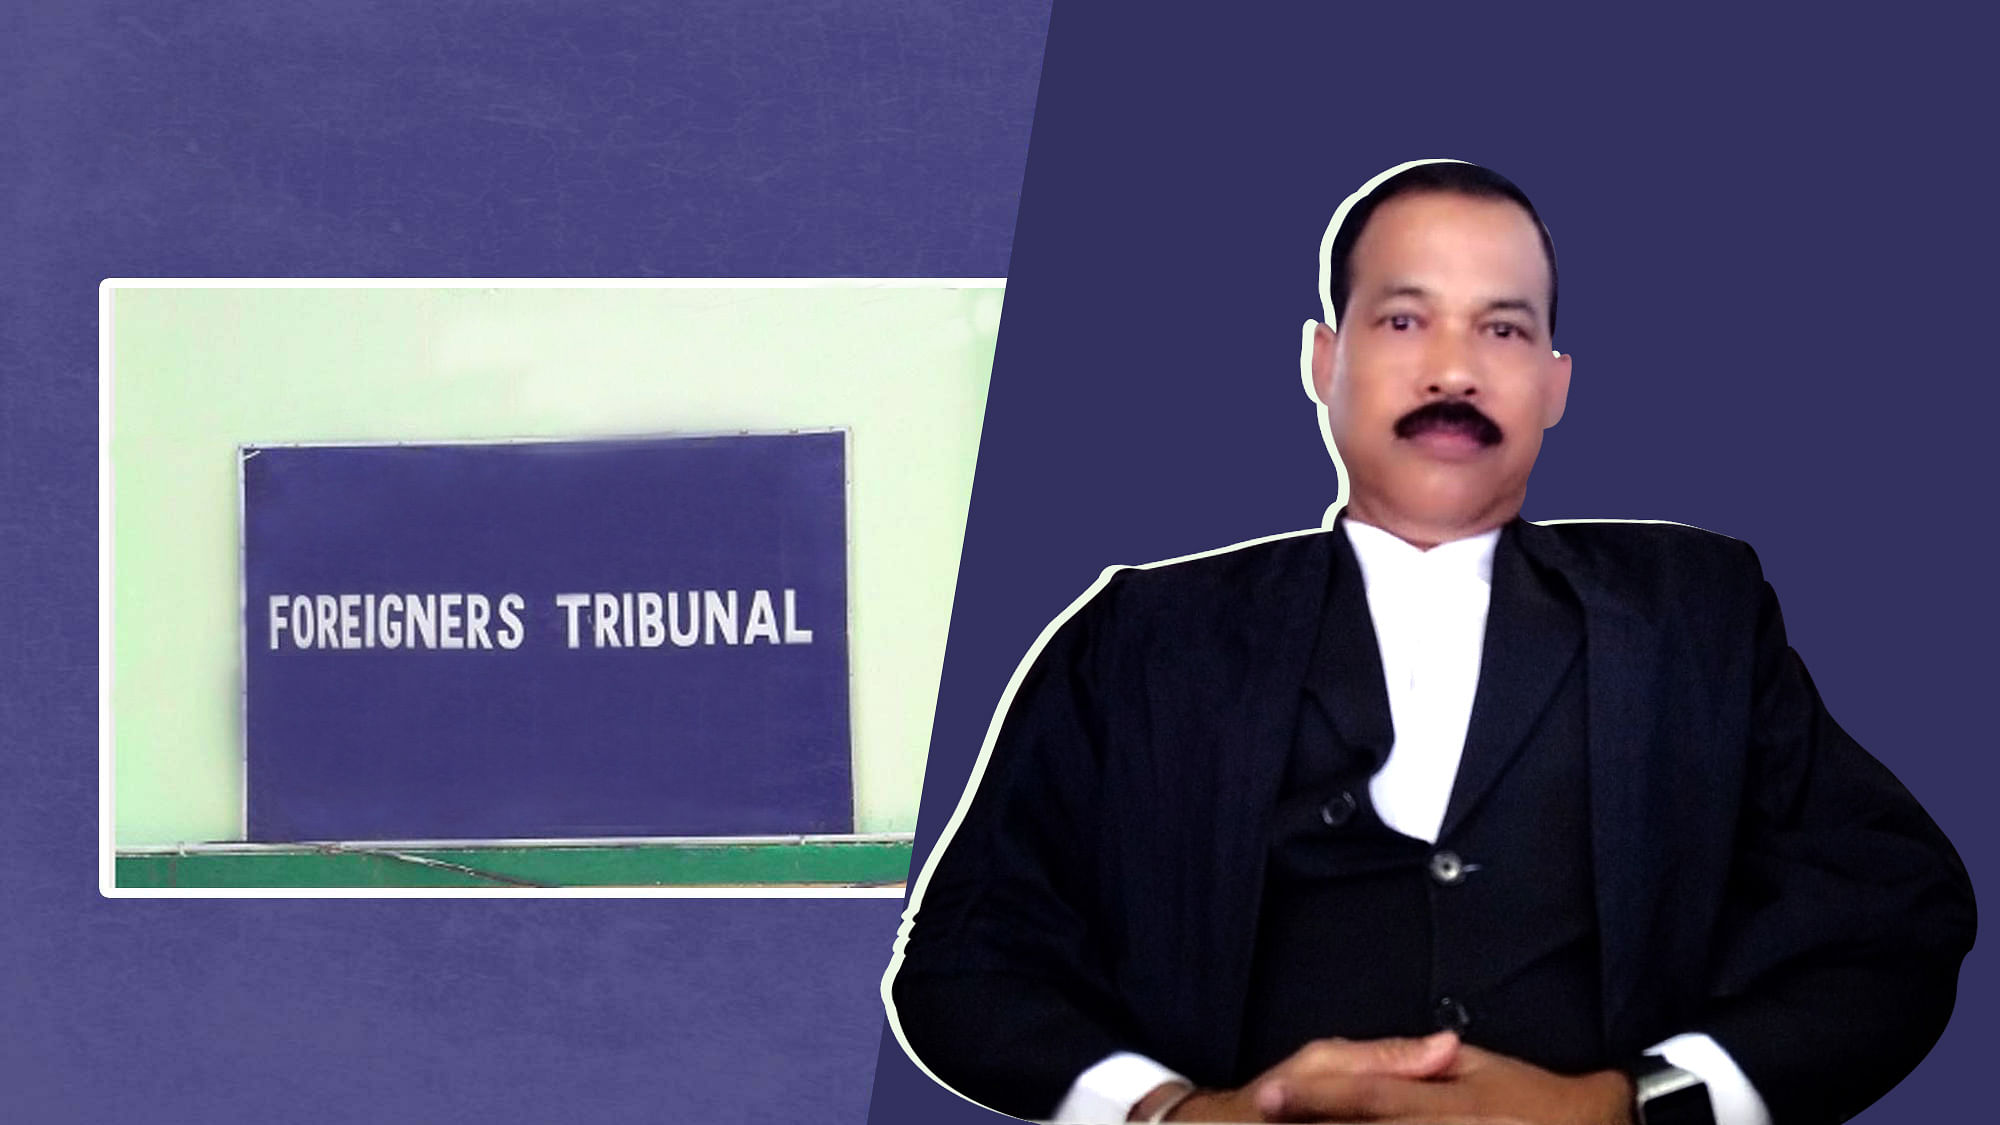 NRC: Exclusive interview with a former judicial officer of Assam’s Foreigners Tribunals. He claims he was removed by the Assam government for not declaring enough ‘foreigners’. &nbsp;